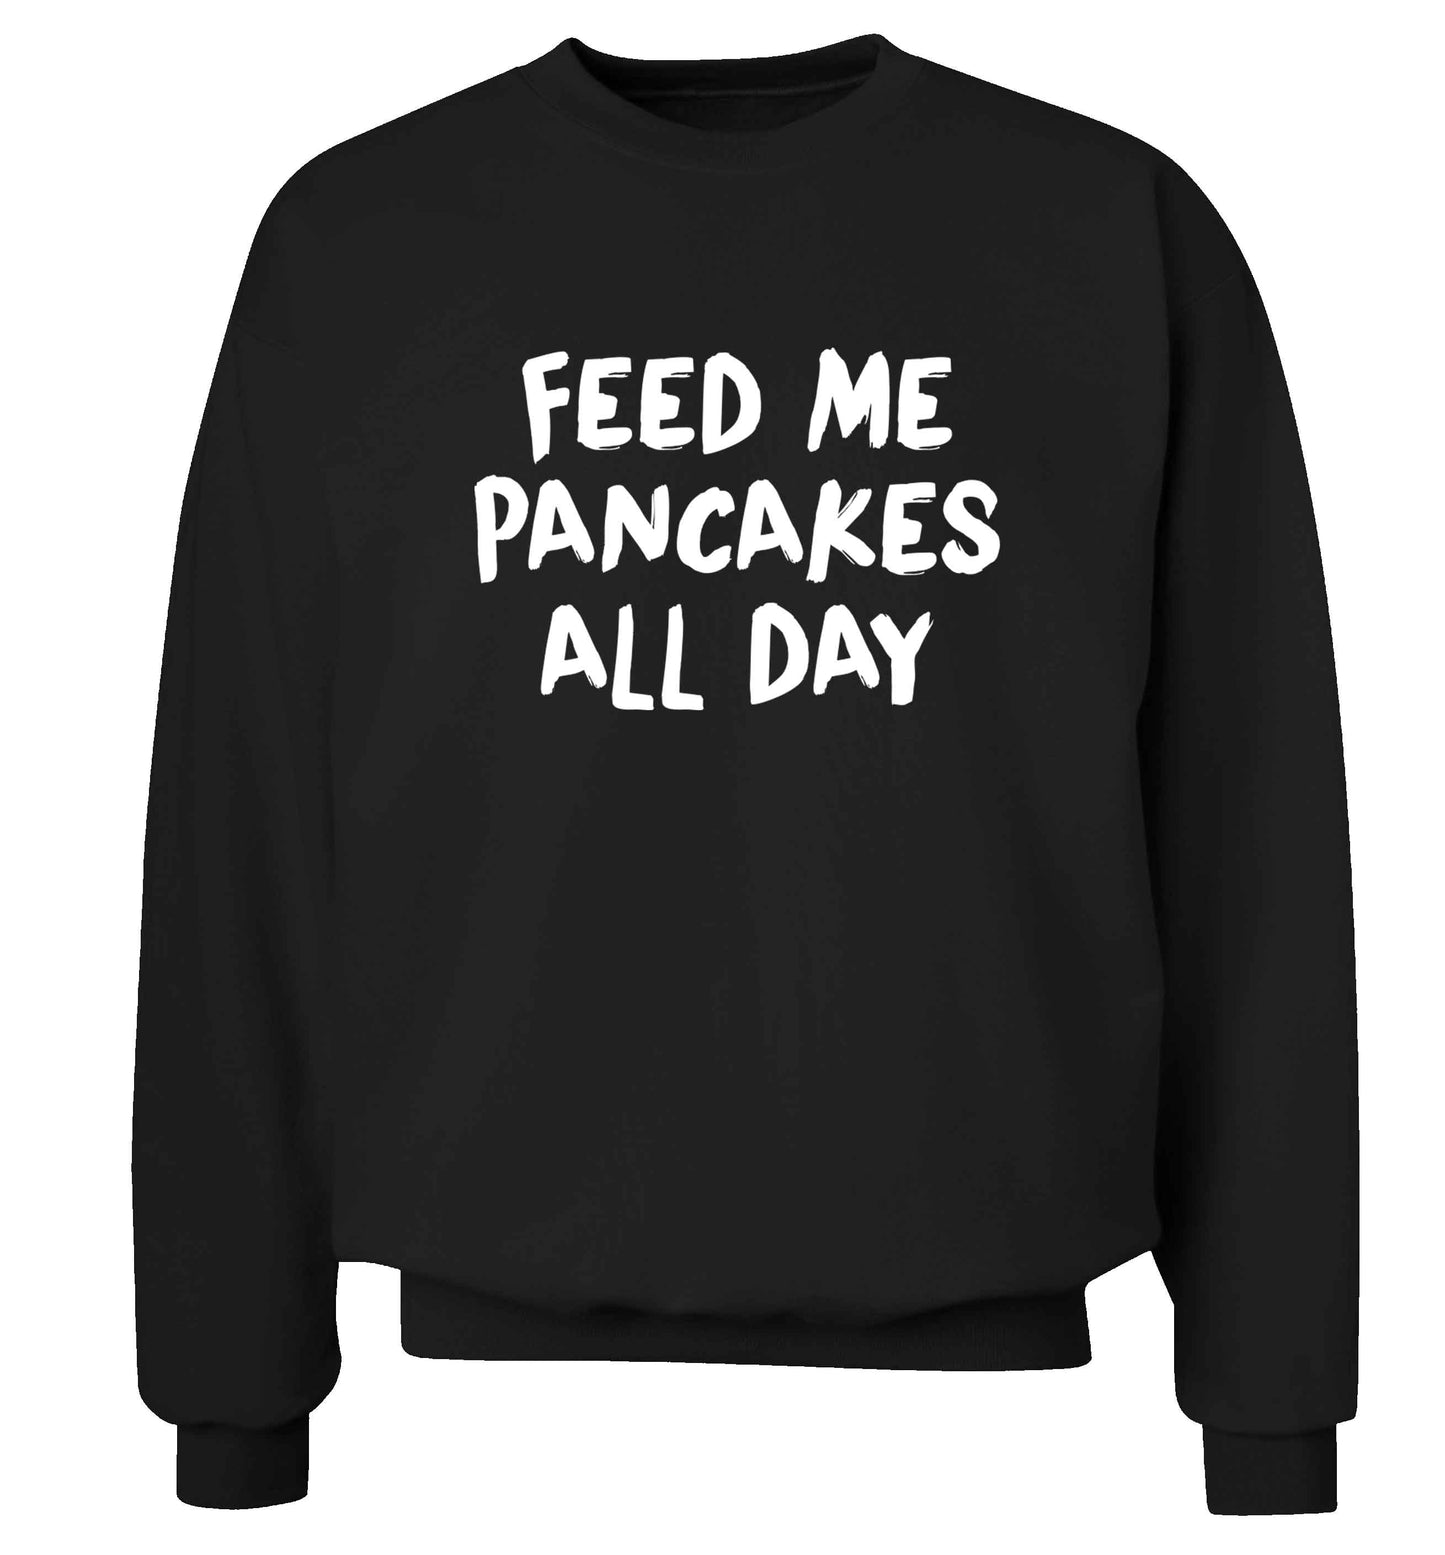 Feed me pancakes all day adult's unisex black sweater 2XL